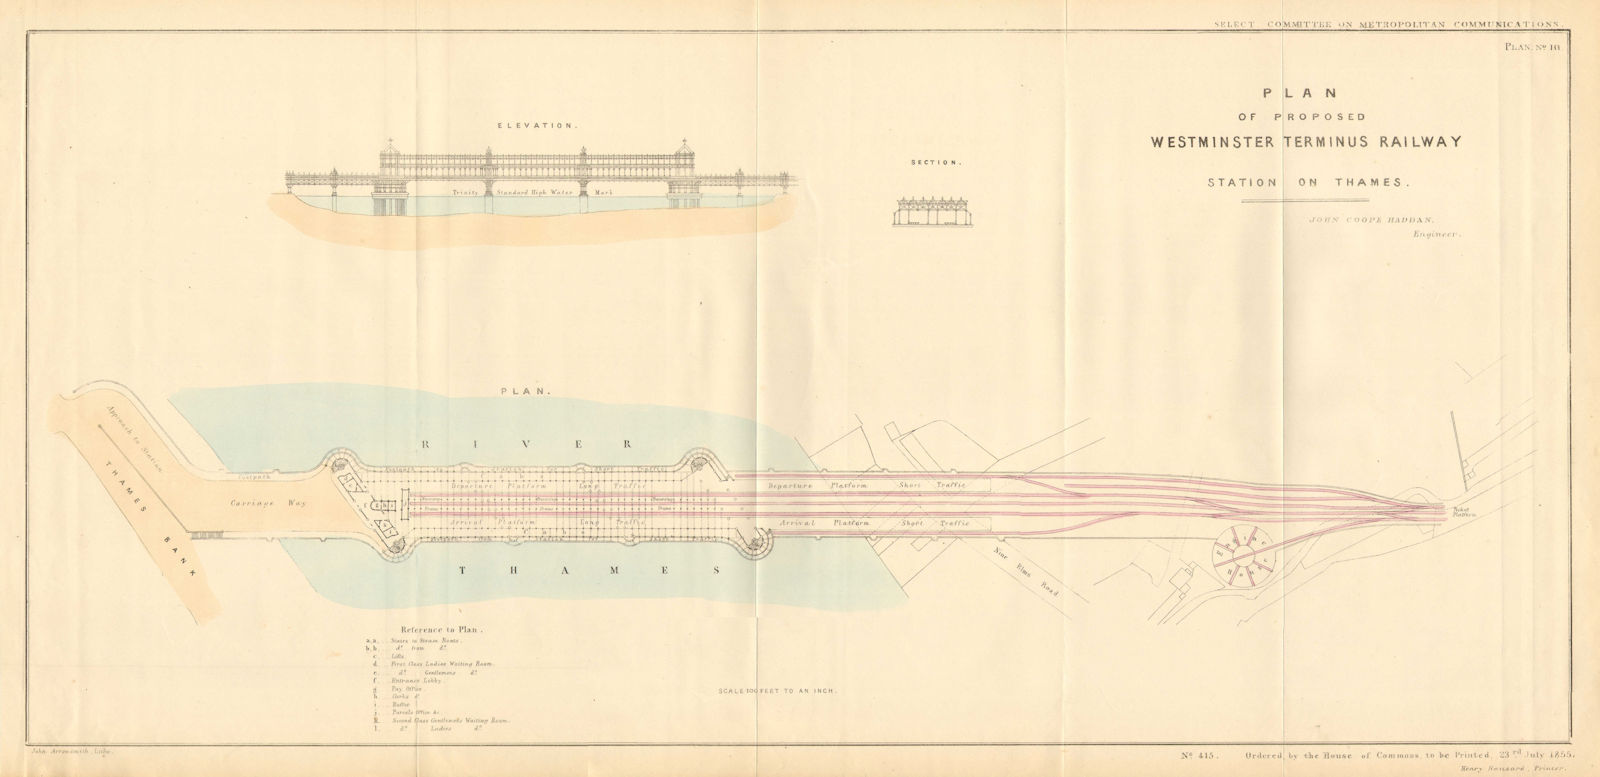 WESTMINSTER TERMINUS RAILWAY 'Station on Thames' proposal. JC HADDAN 1855 map